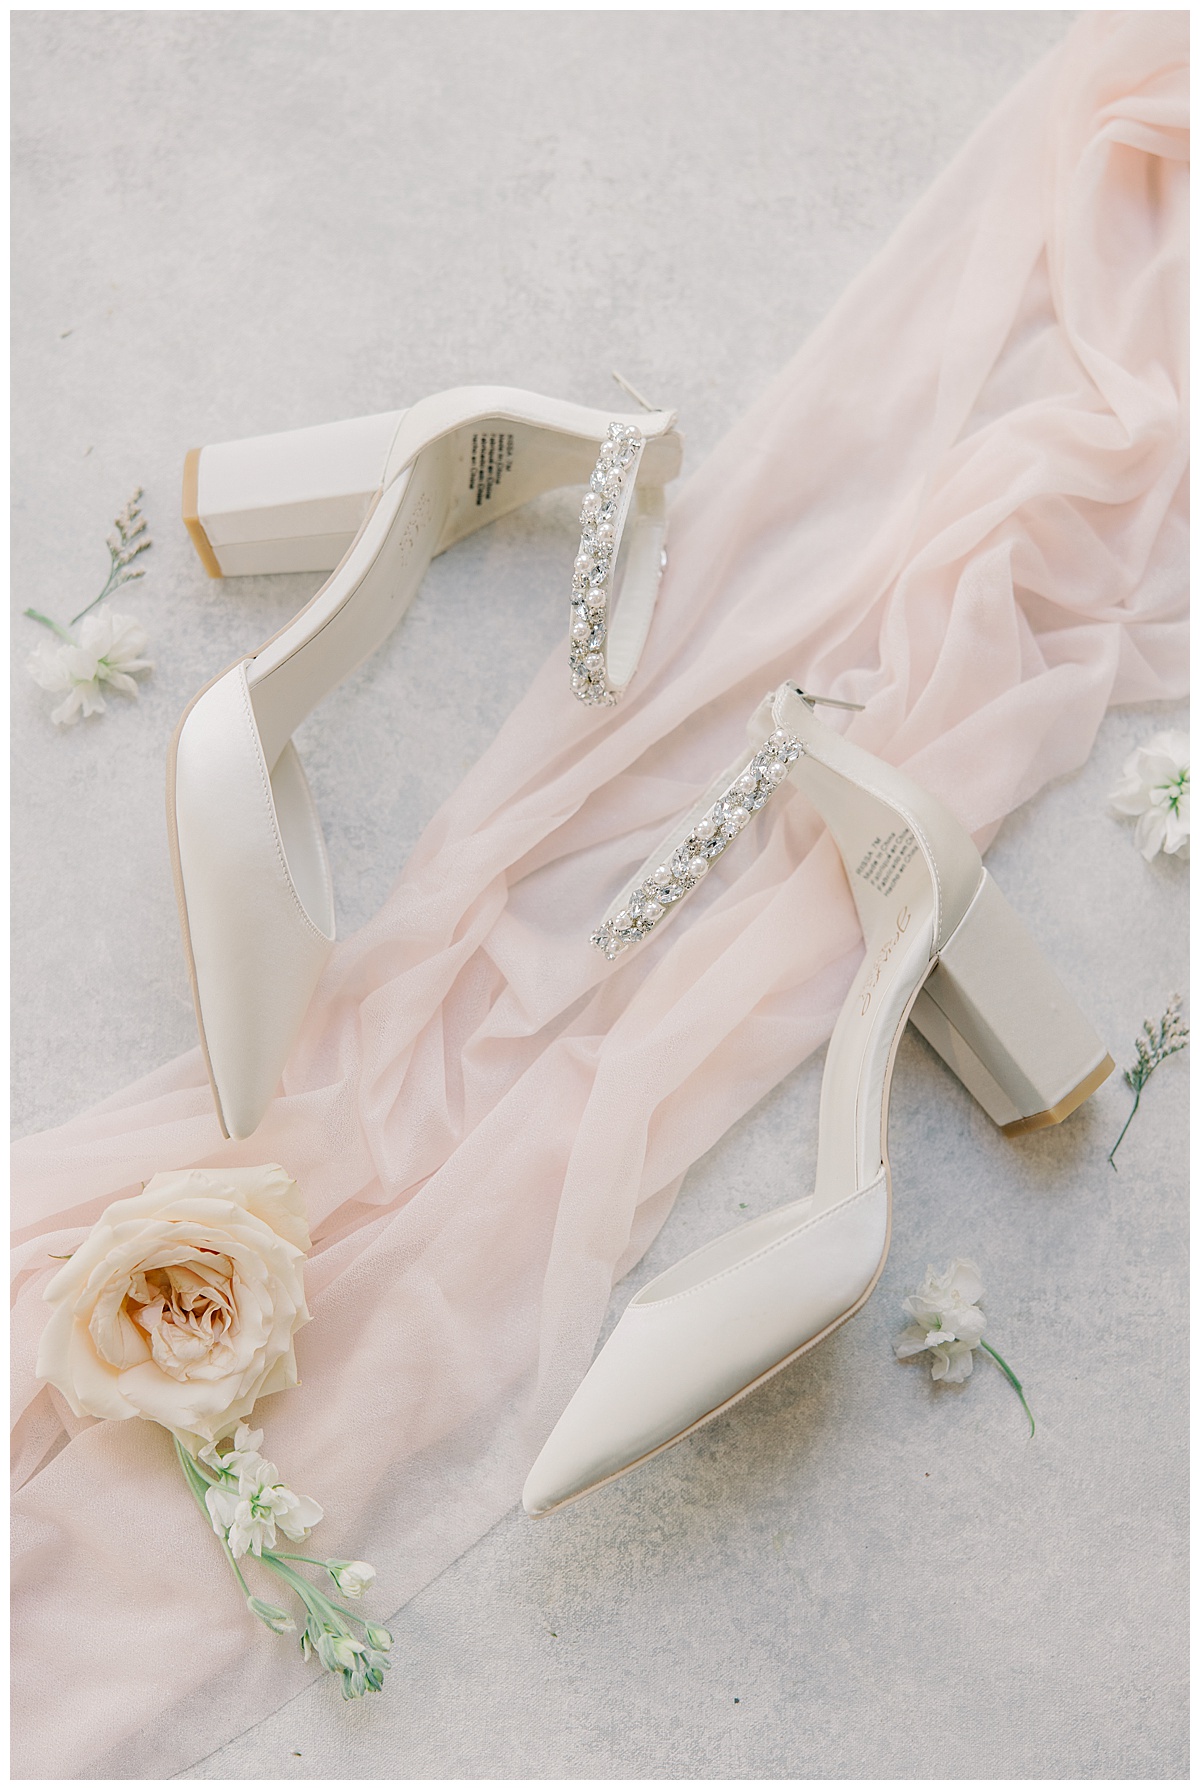 wedding shoes with beads and low block heels 